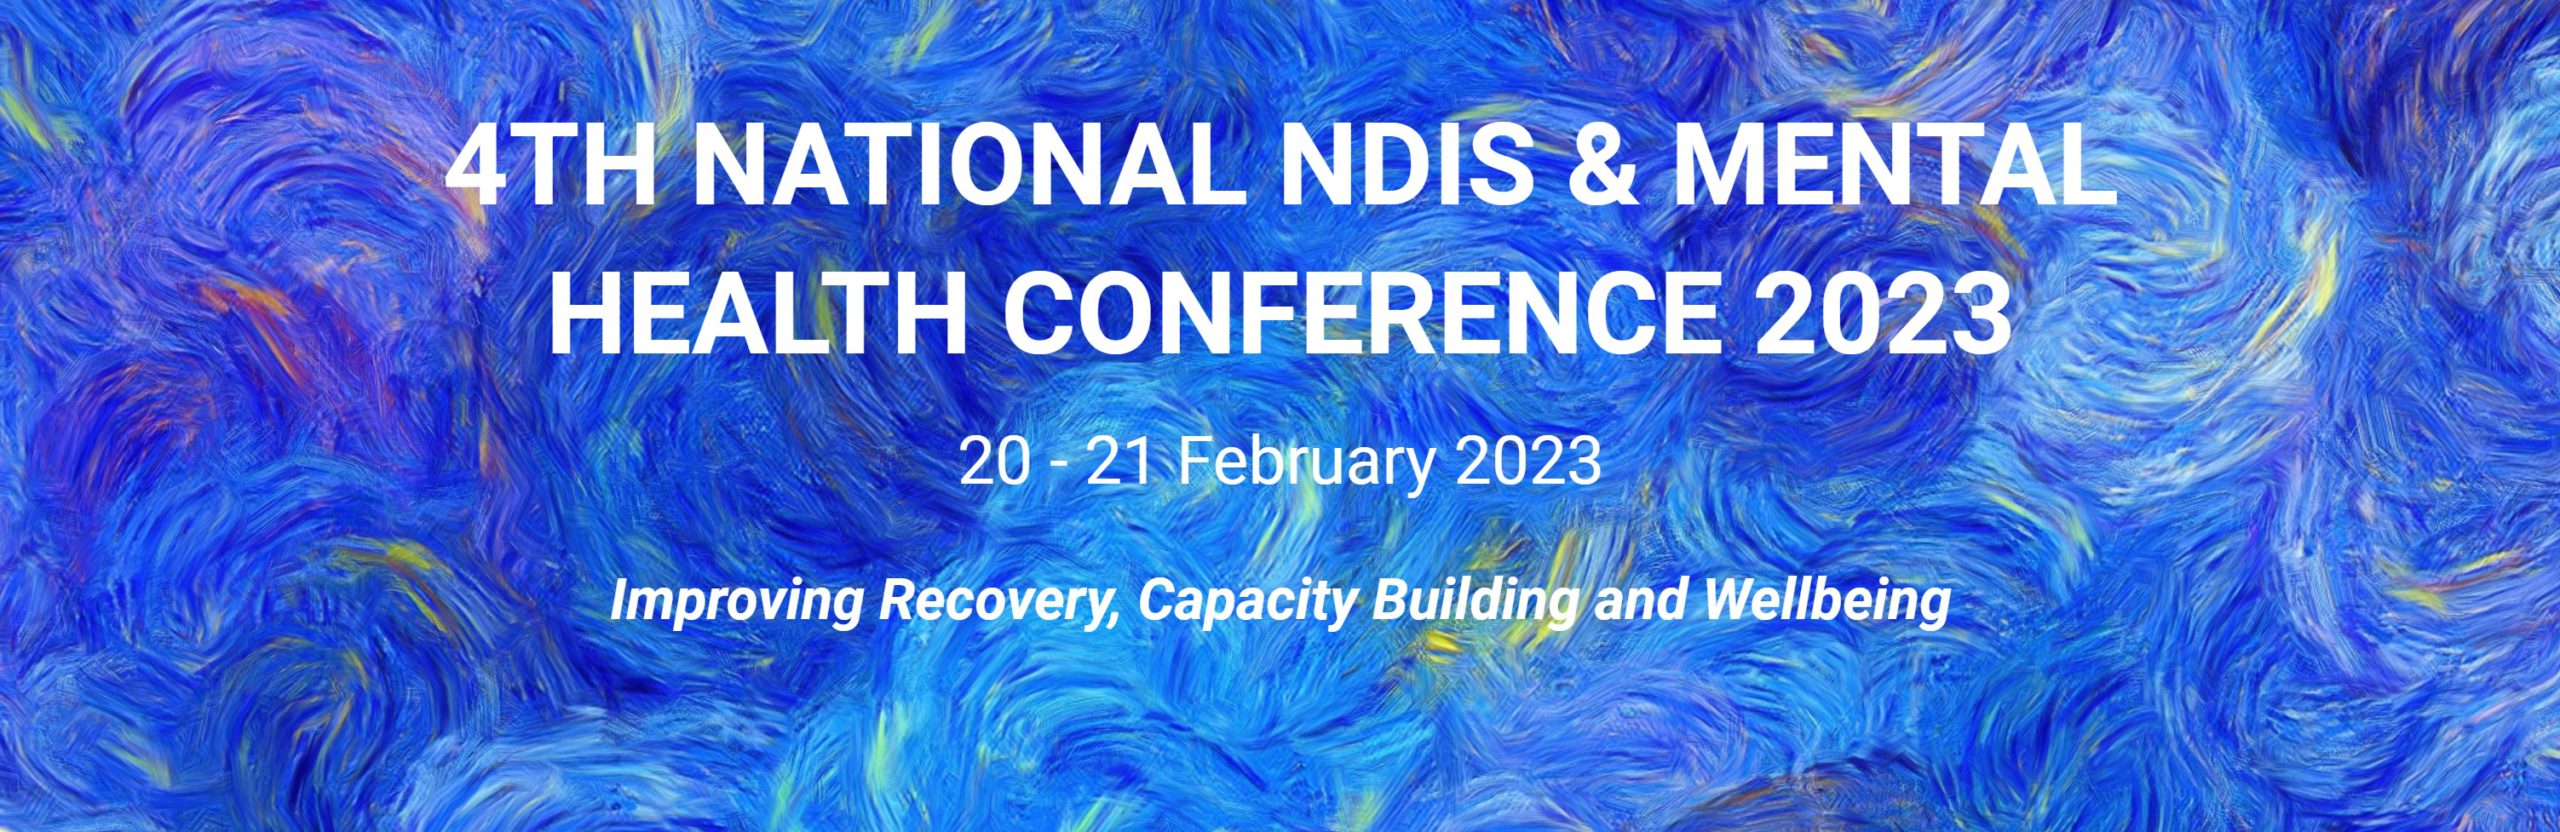 4TH NATIONAL NDIS & MENTAL HEALTH CONFERENCE 2023 The Alive National